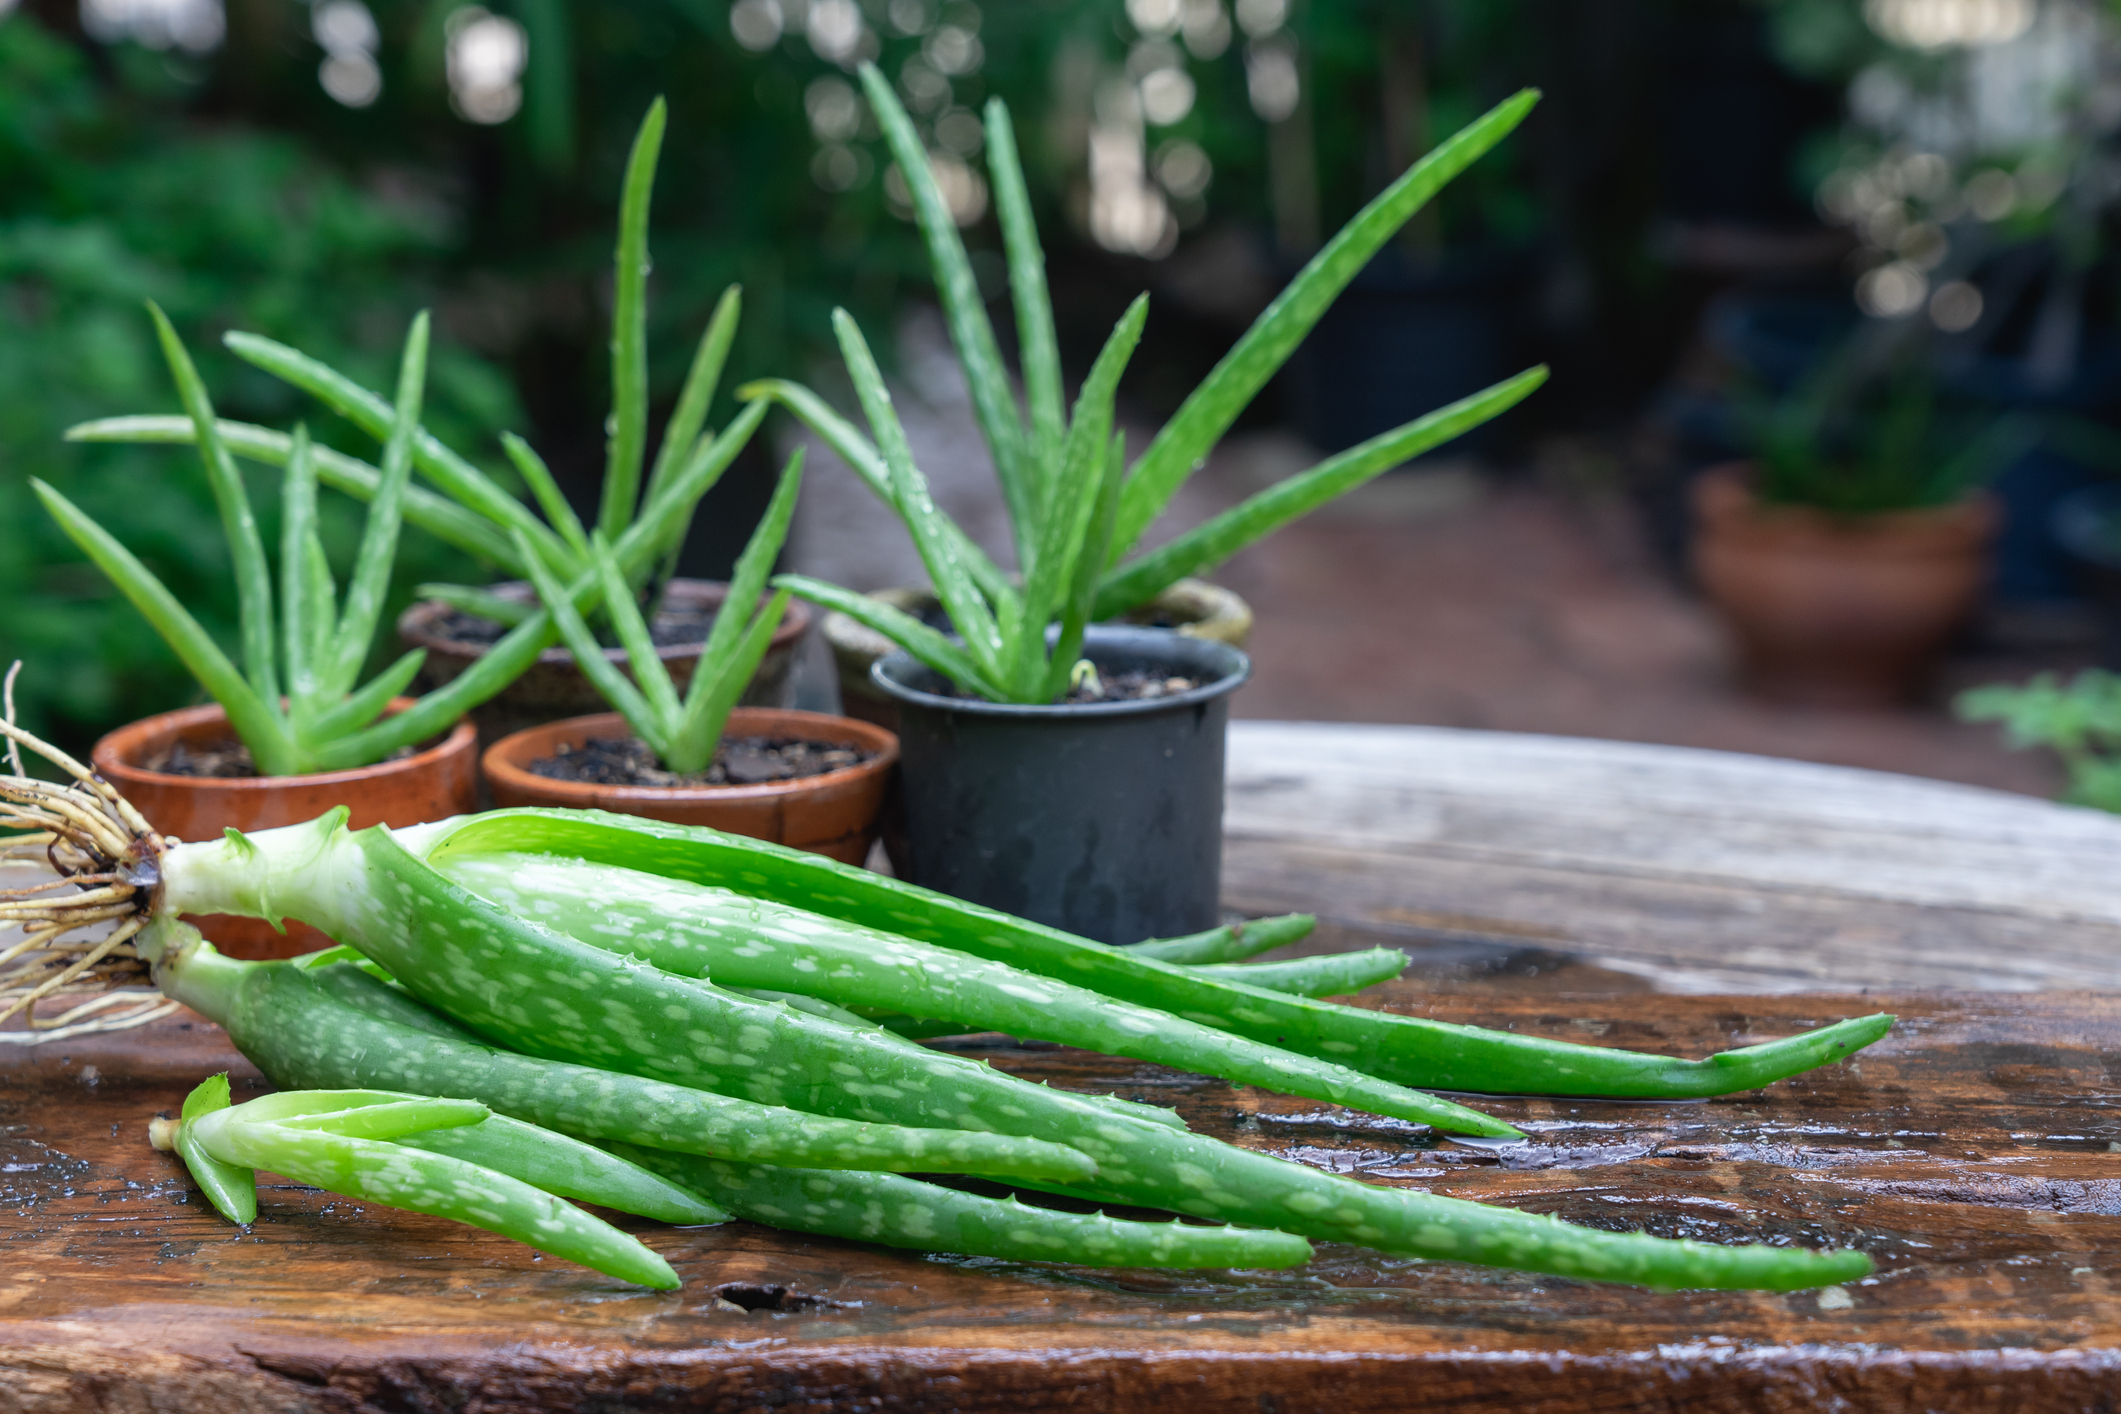 Concurreren Drank Naar boven Tips on How to Care for Aloe Vera Plants in Your Home | HappySprout